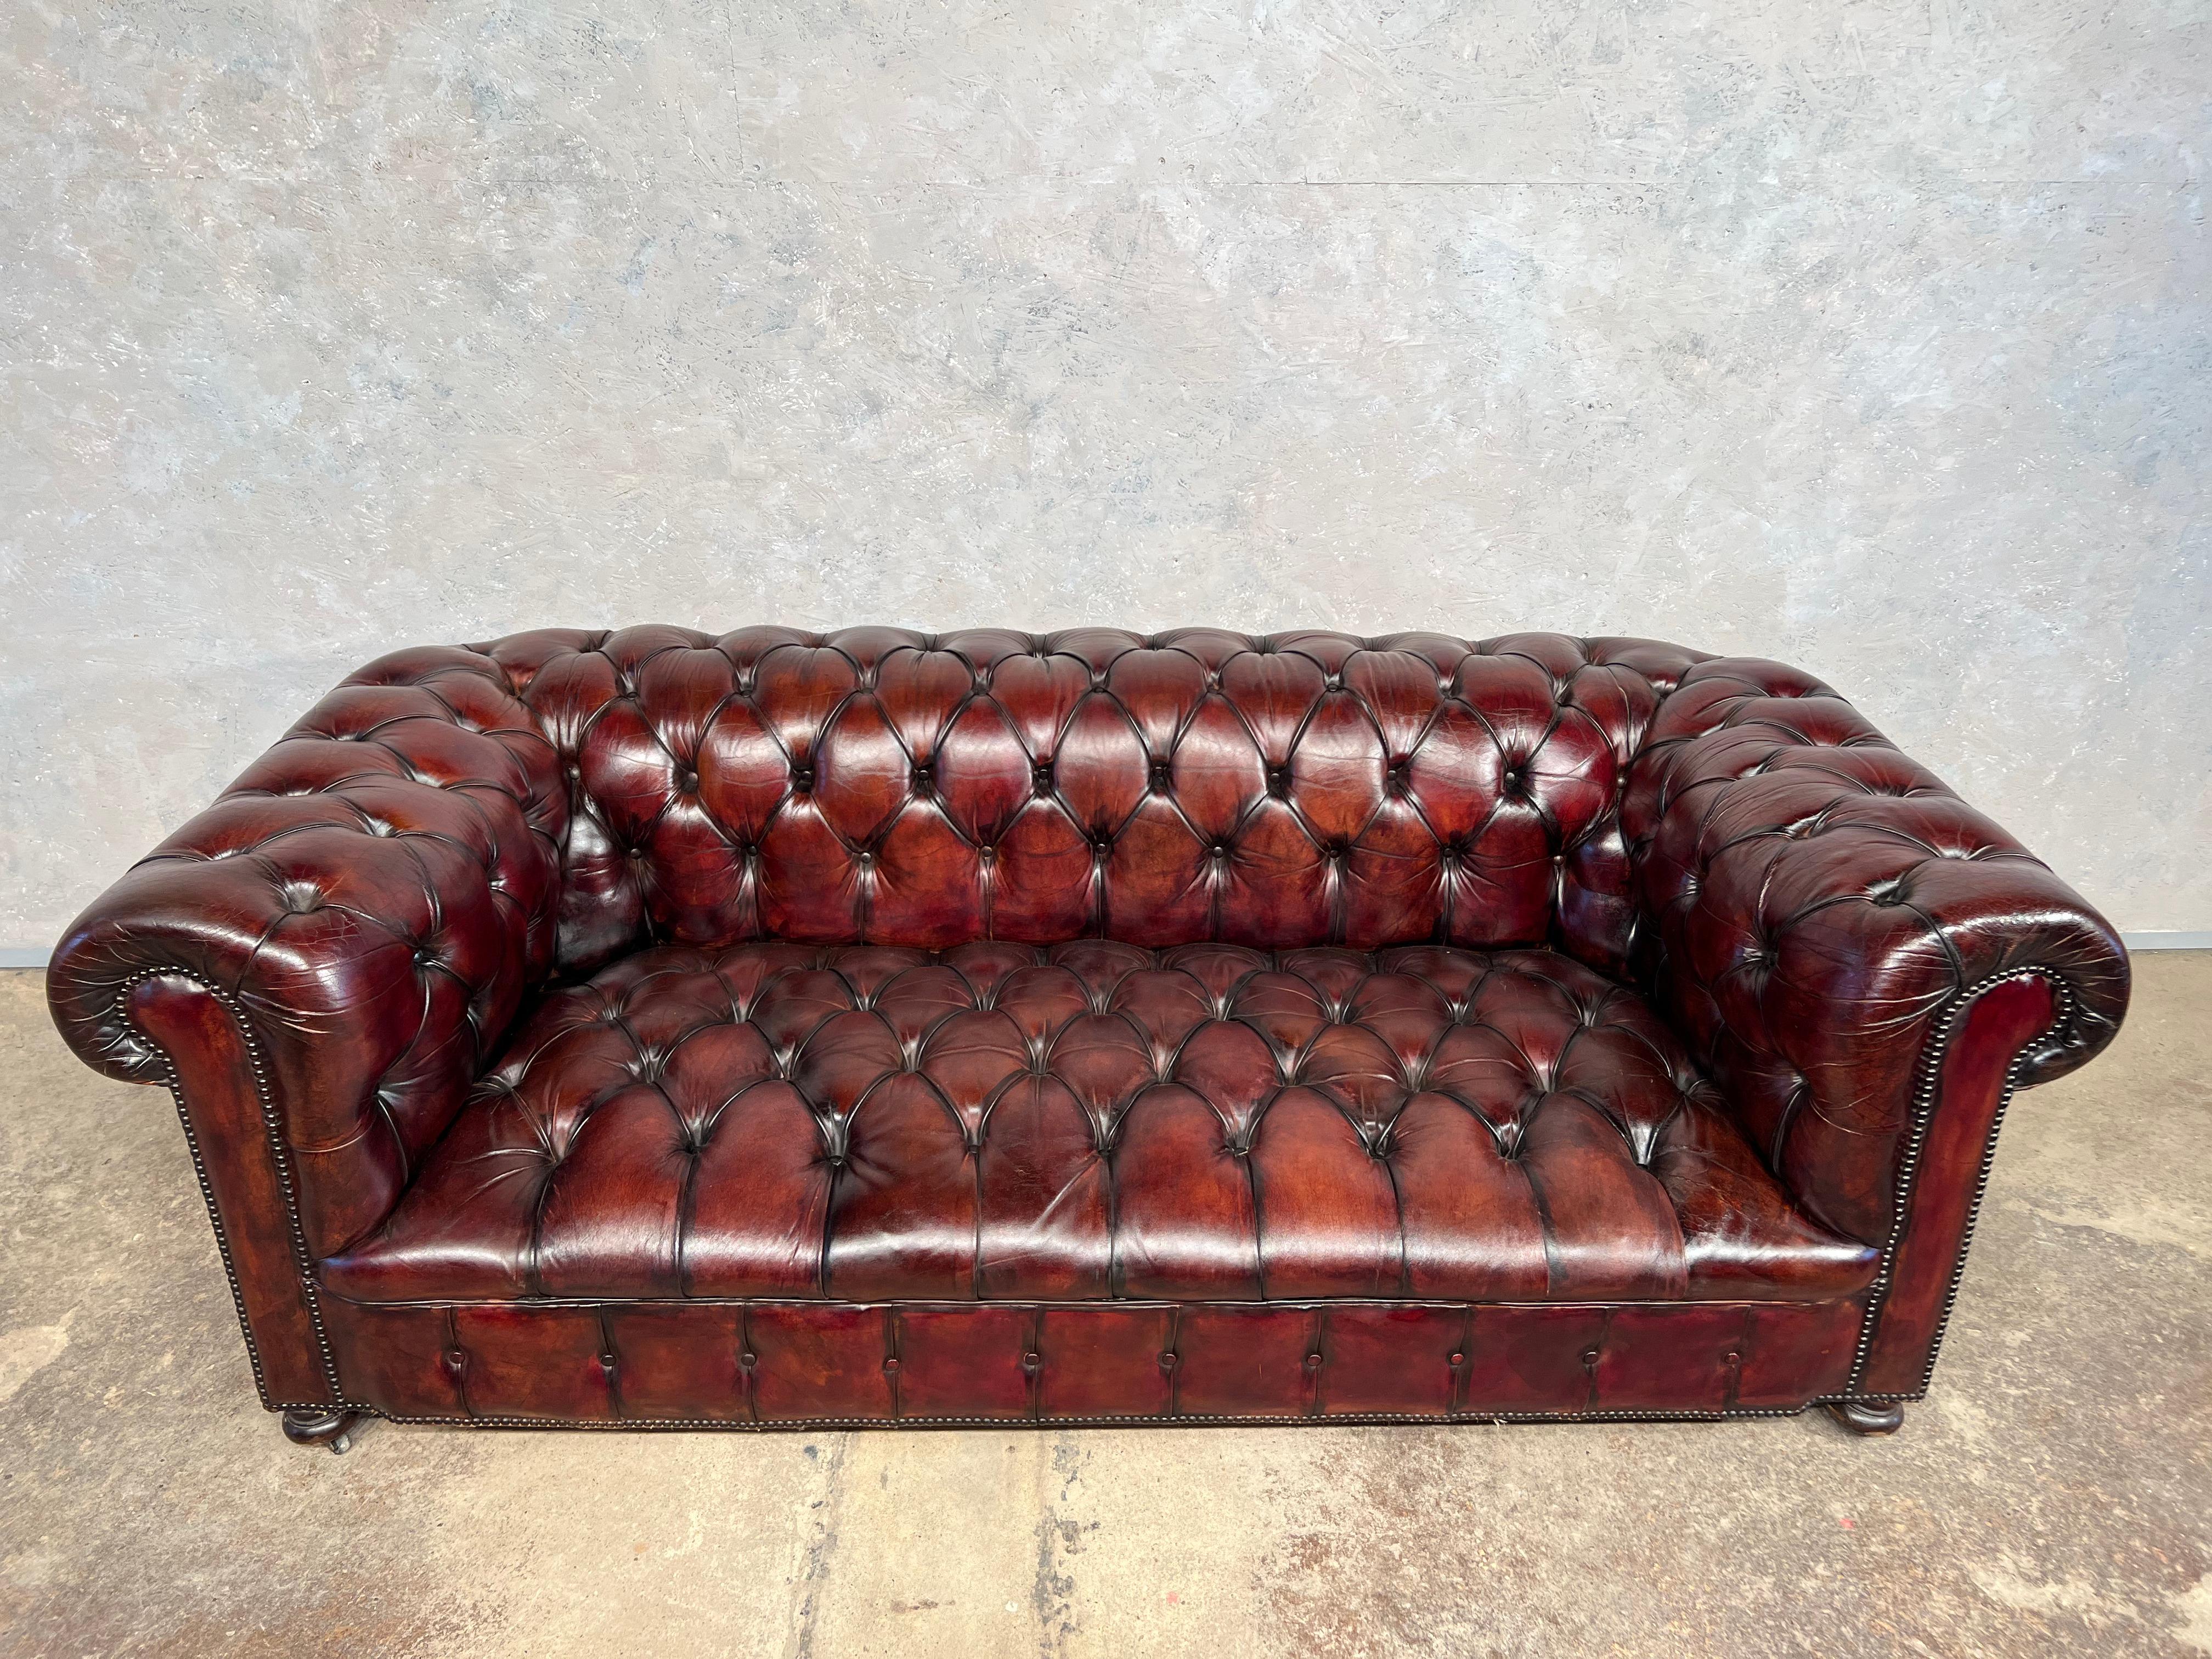 Antique fully buttoned patinated chestnut brown leather chesterfield with horse hair filling.

A most beautiful item, circa 1920 with it’s original leather, which has a Patinated finish, fully coil sprung.

Viewing is welcome at our showroom in